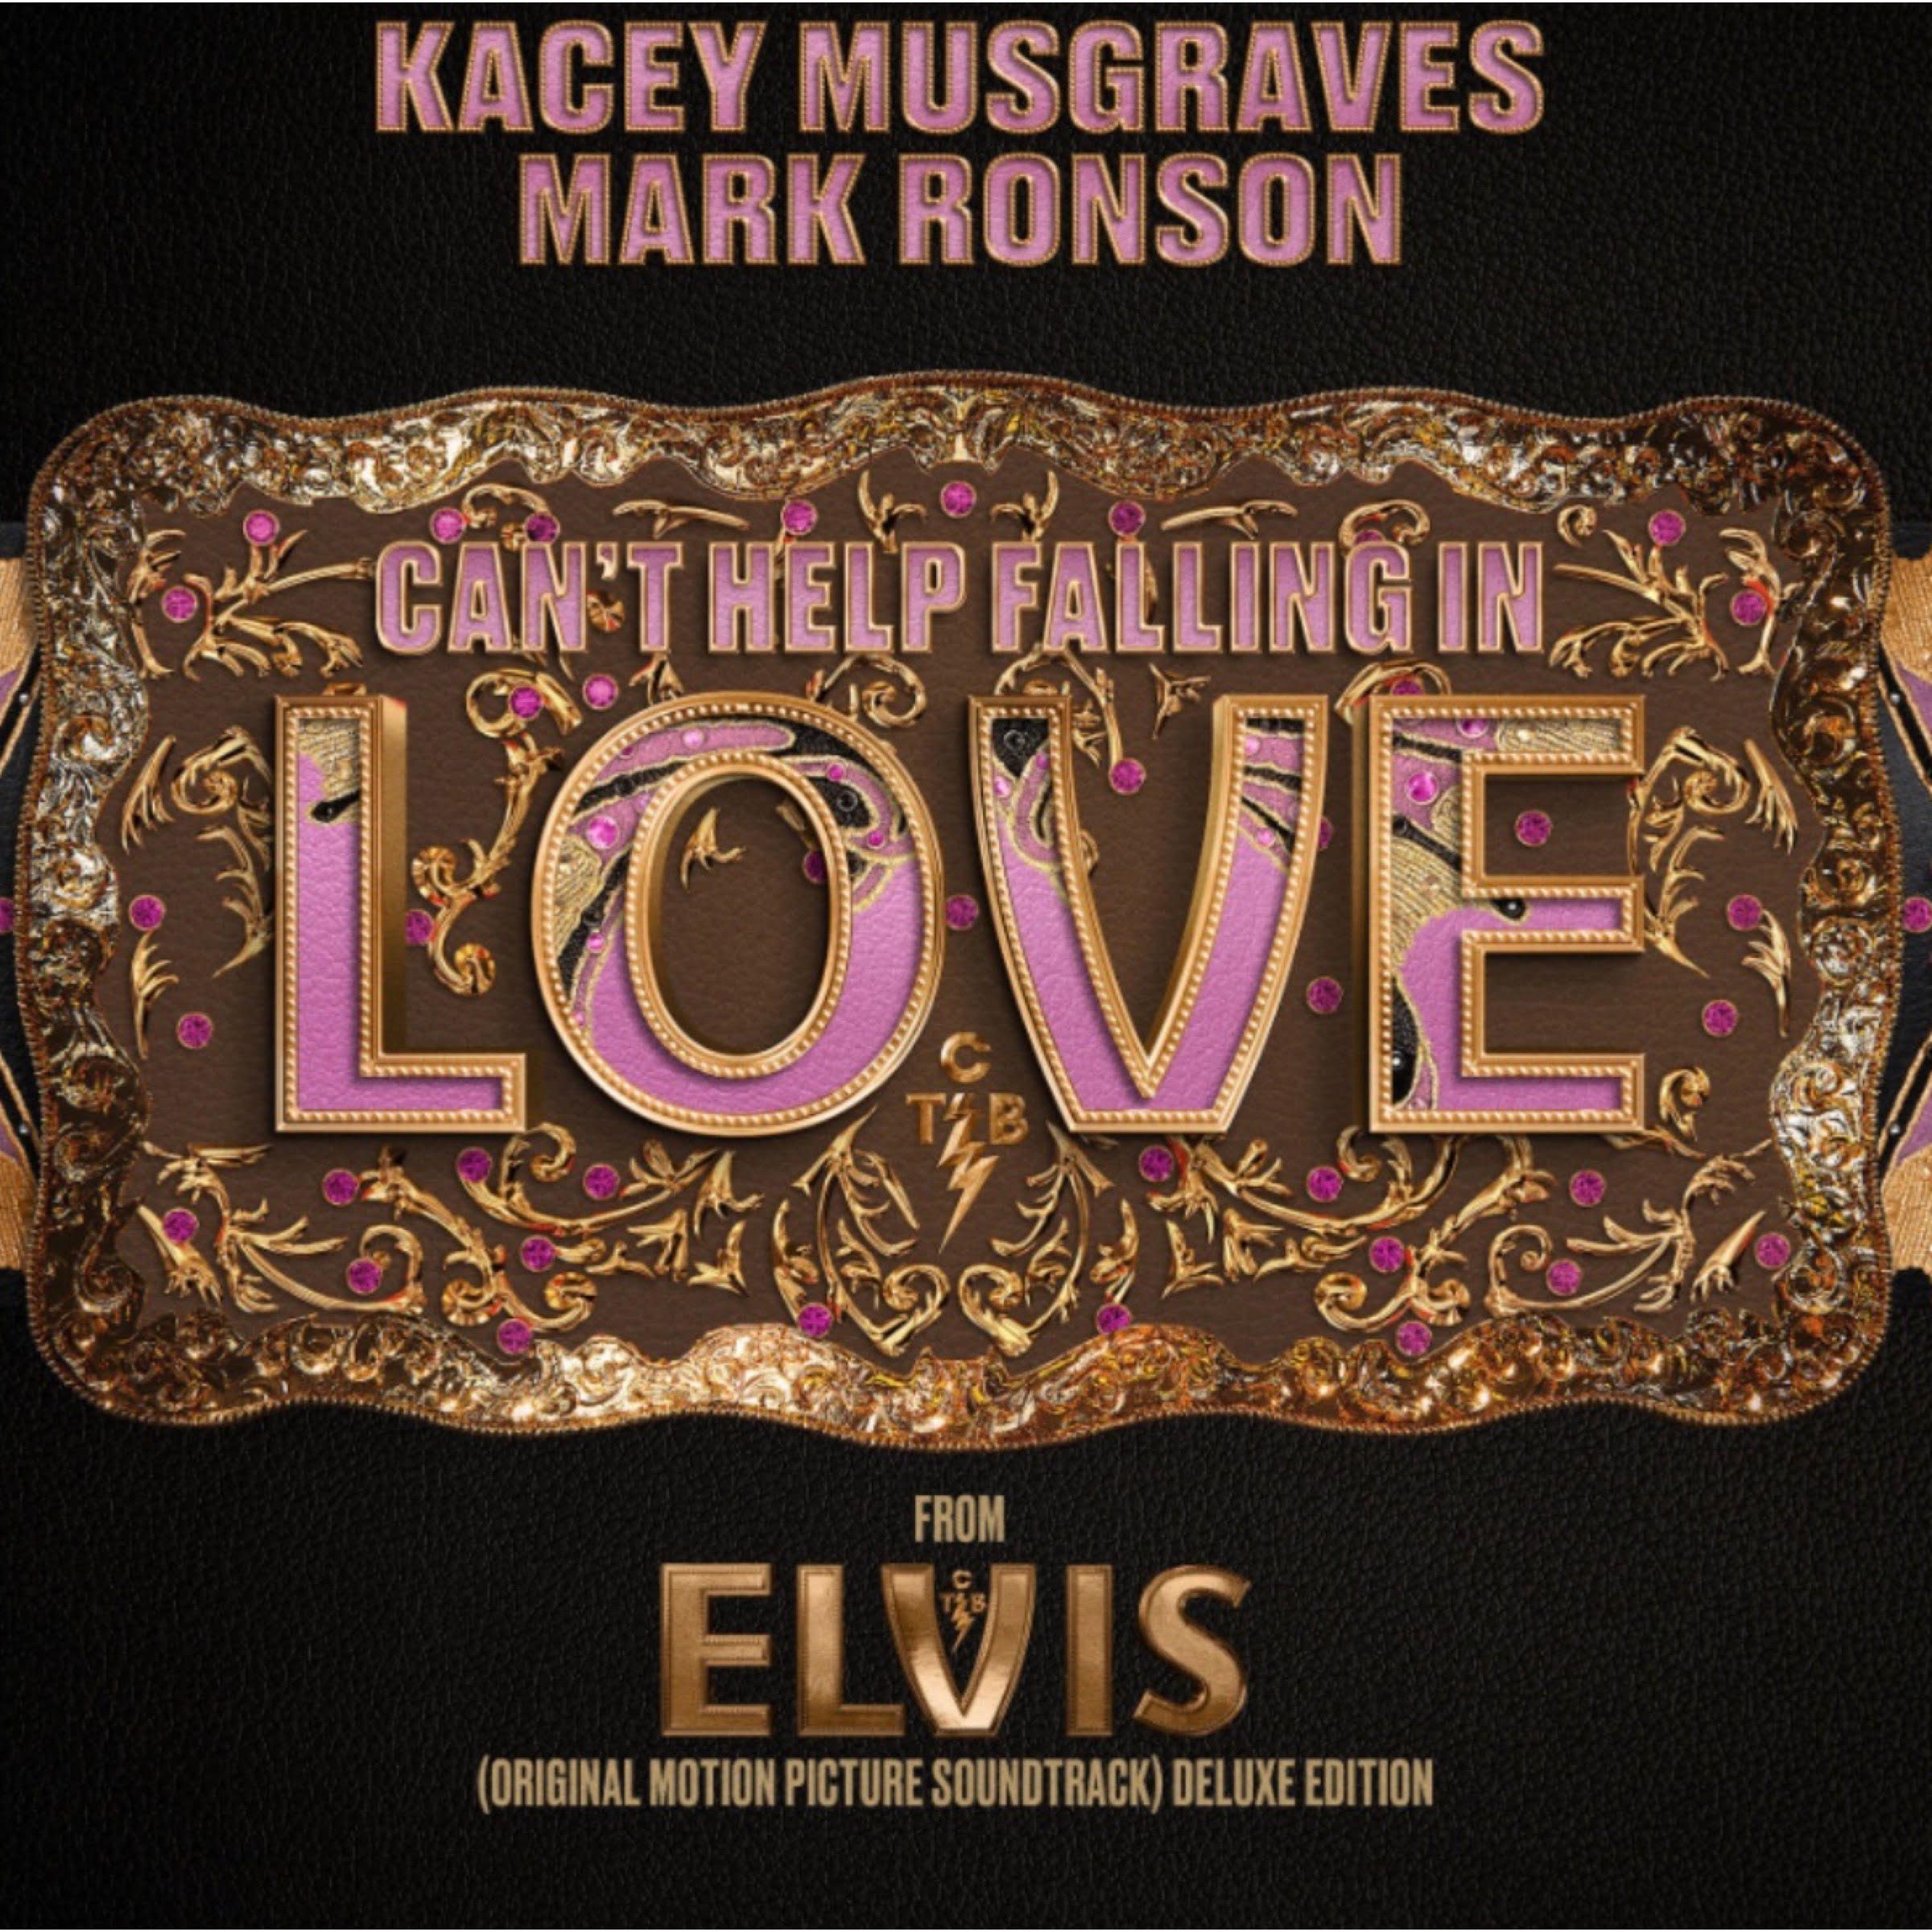 KACEY MUSGRAVES x MARK RONSON | “CAN’T HELP FALLING IN LOVE” via 360 MAGAZINE